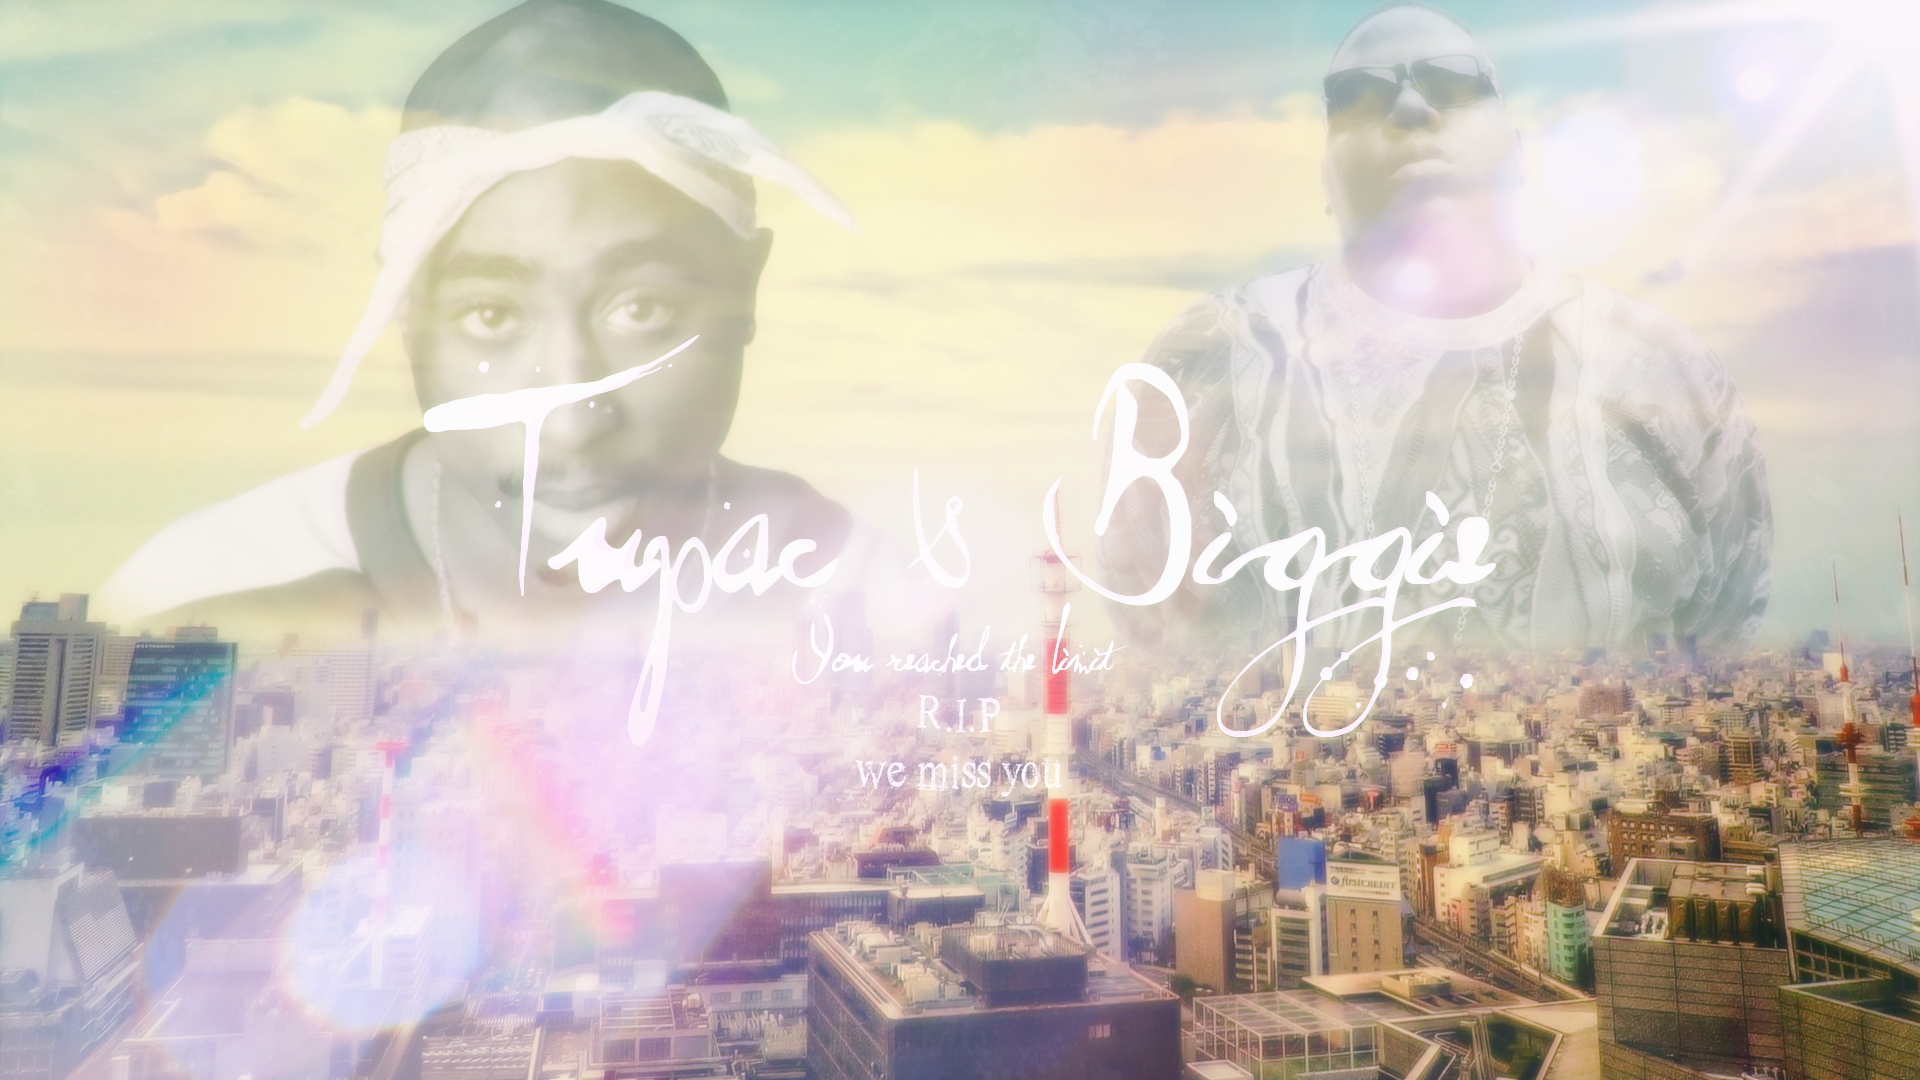 Tupac and Biggie wallpaper by IndicaDesigns on